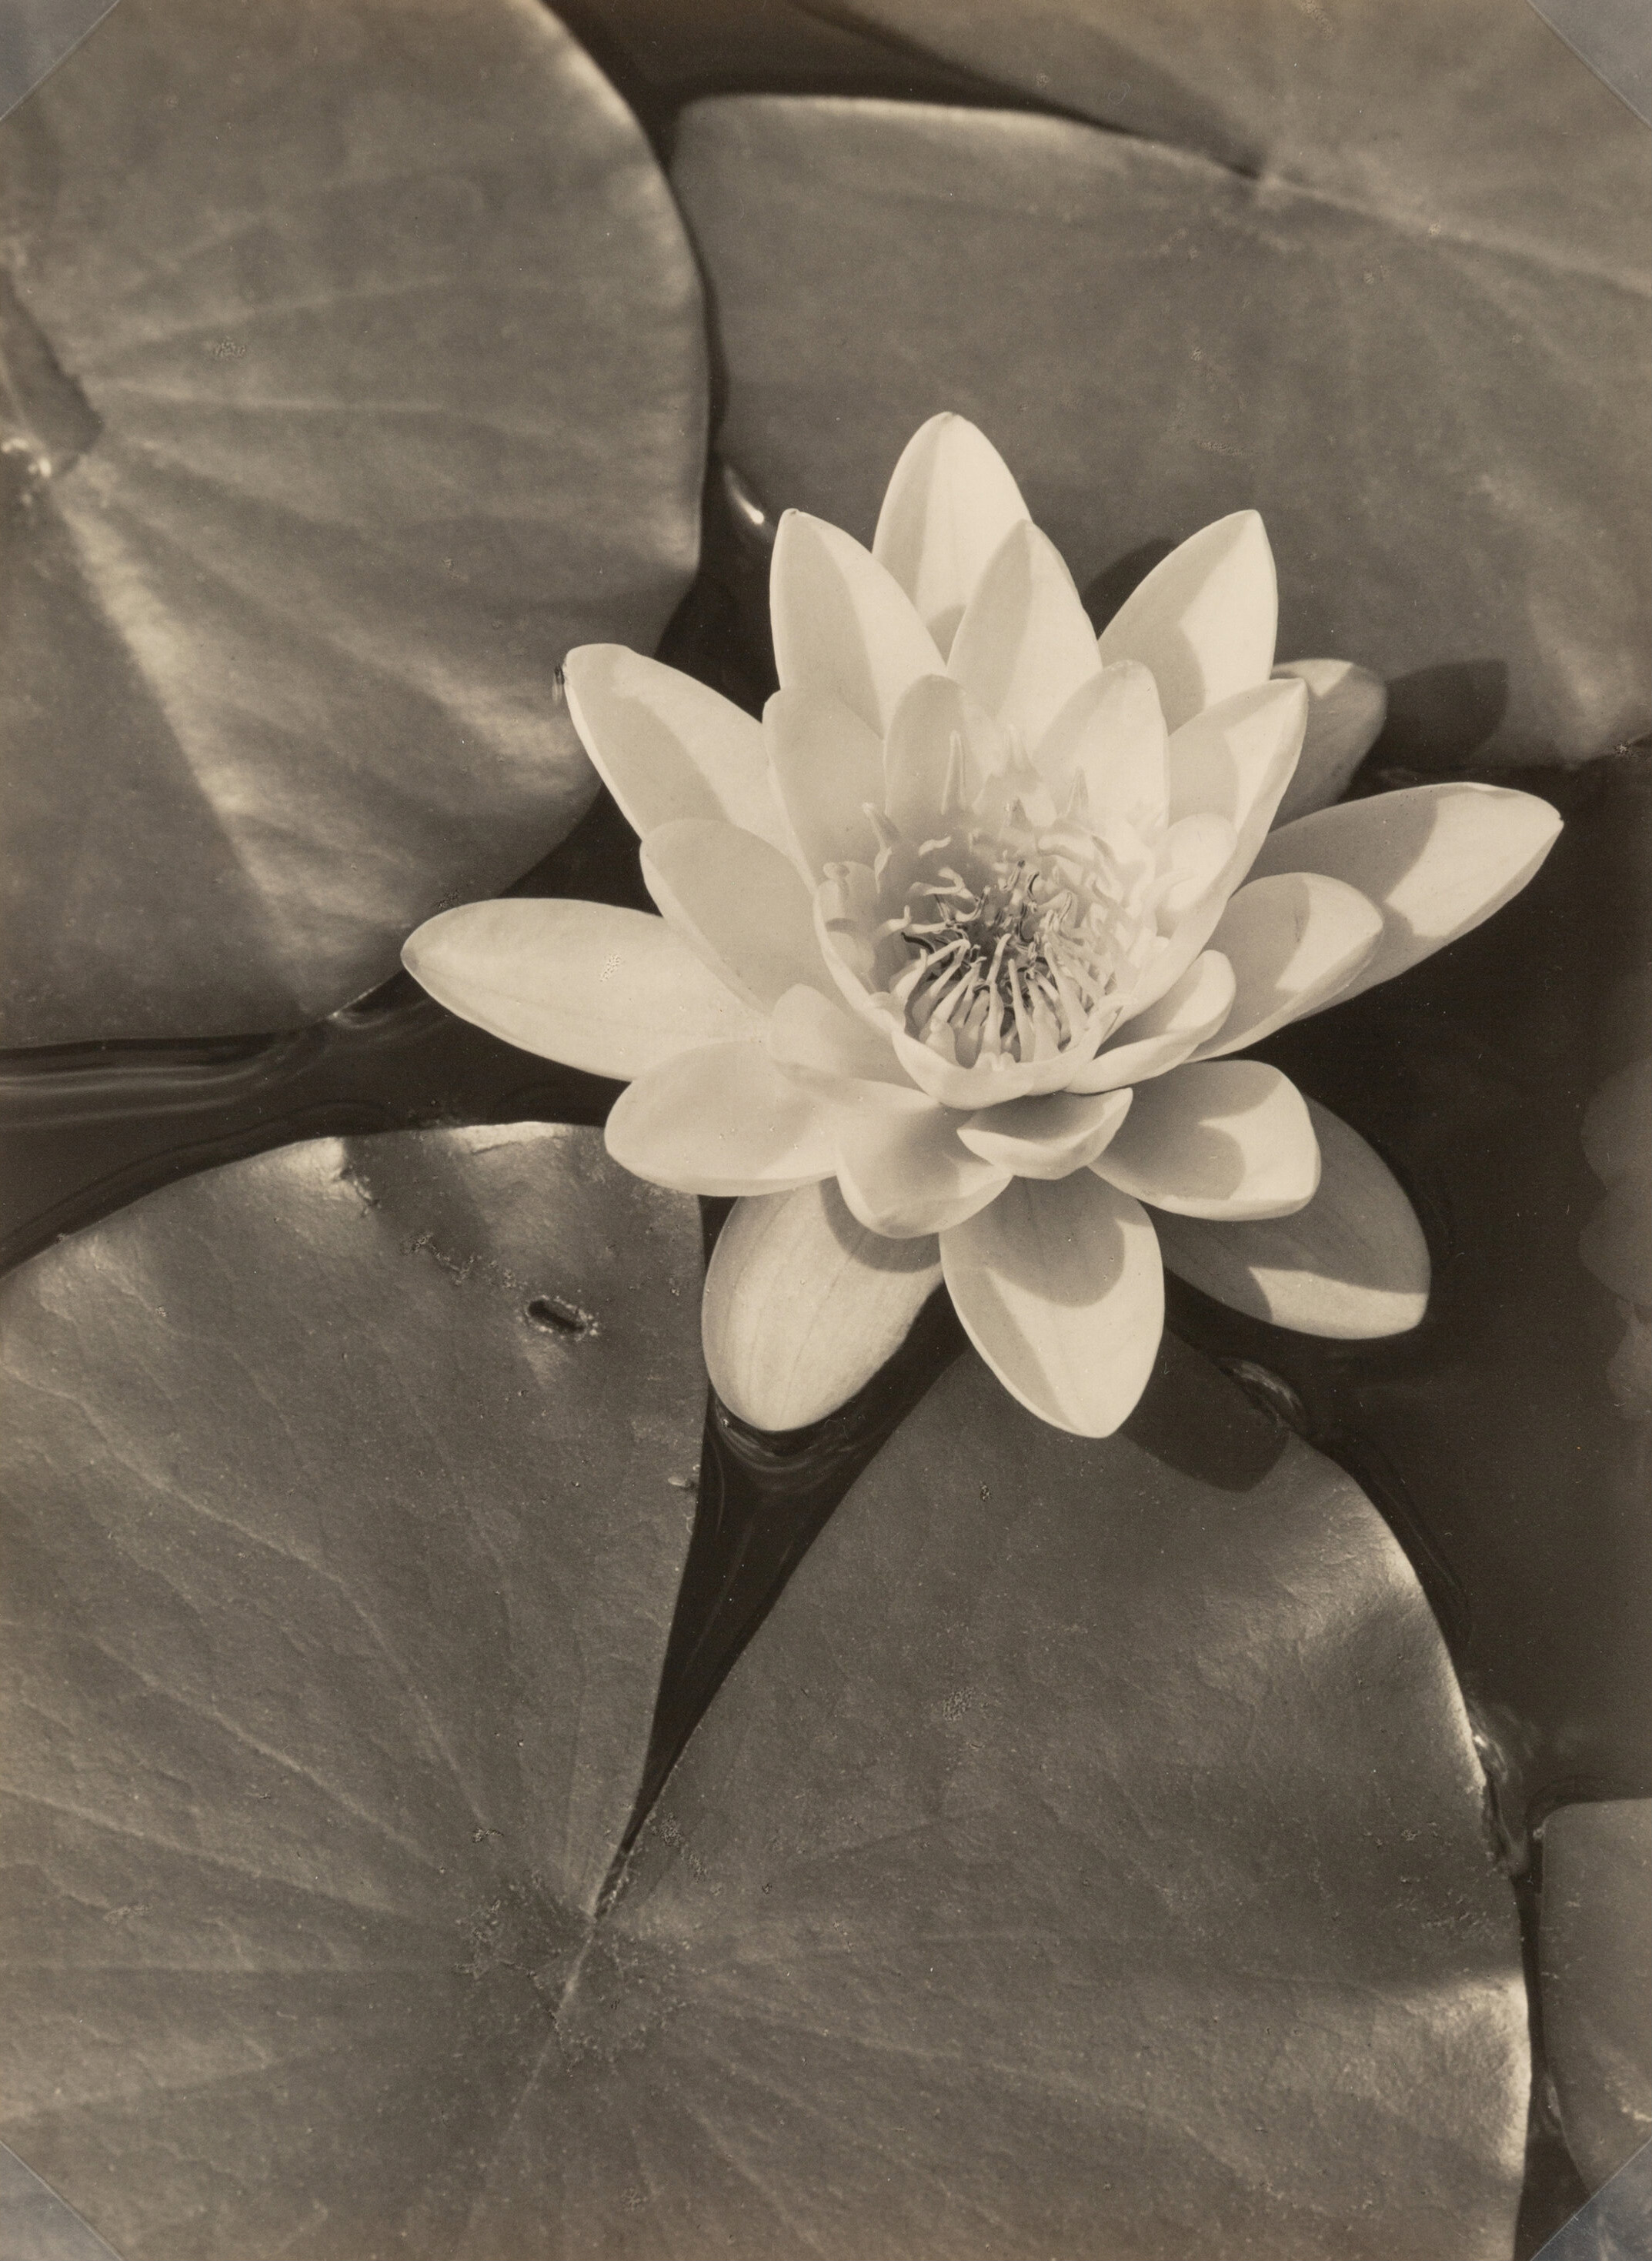 Max Baur (German, 1898-1988) :: Water Lily, circa 1930s. Gelatin silver print, printed later. | src Heritage Auctions